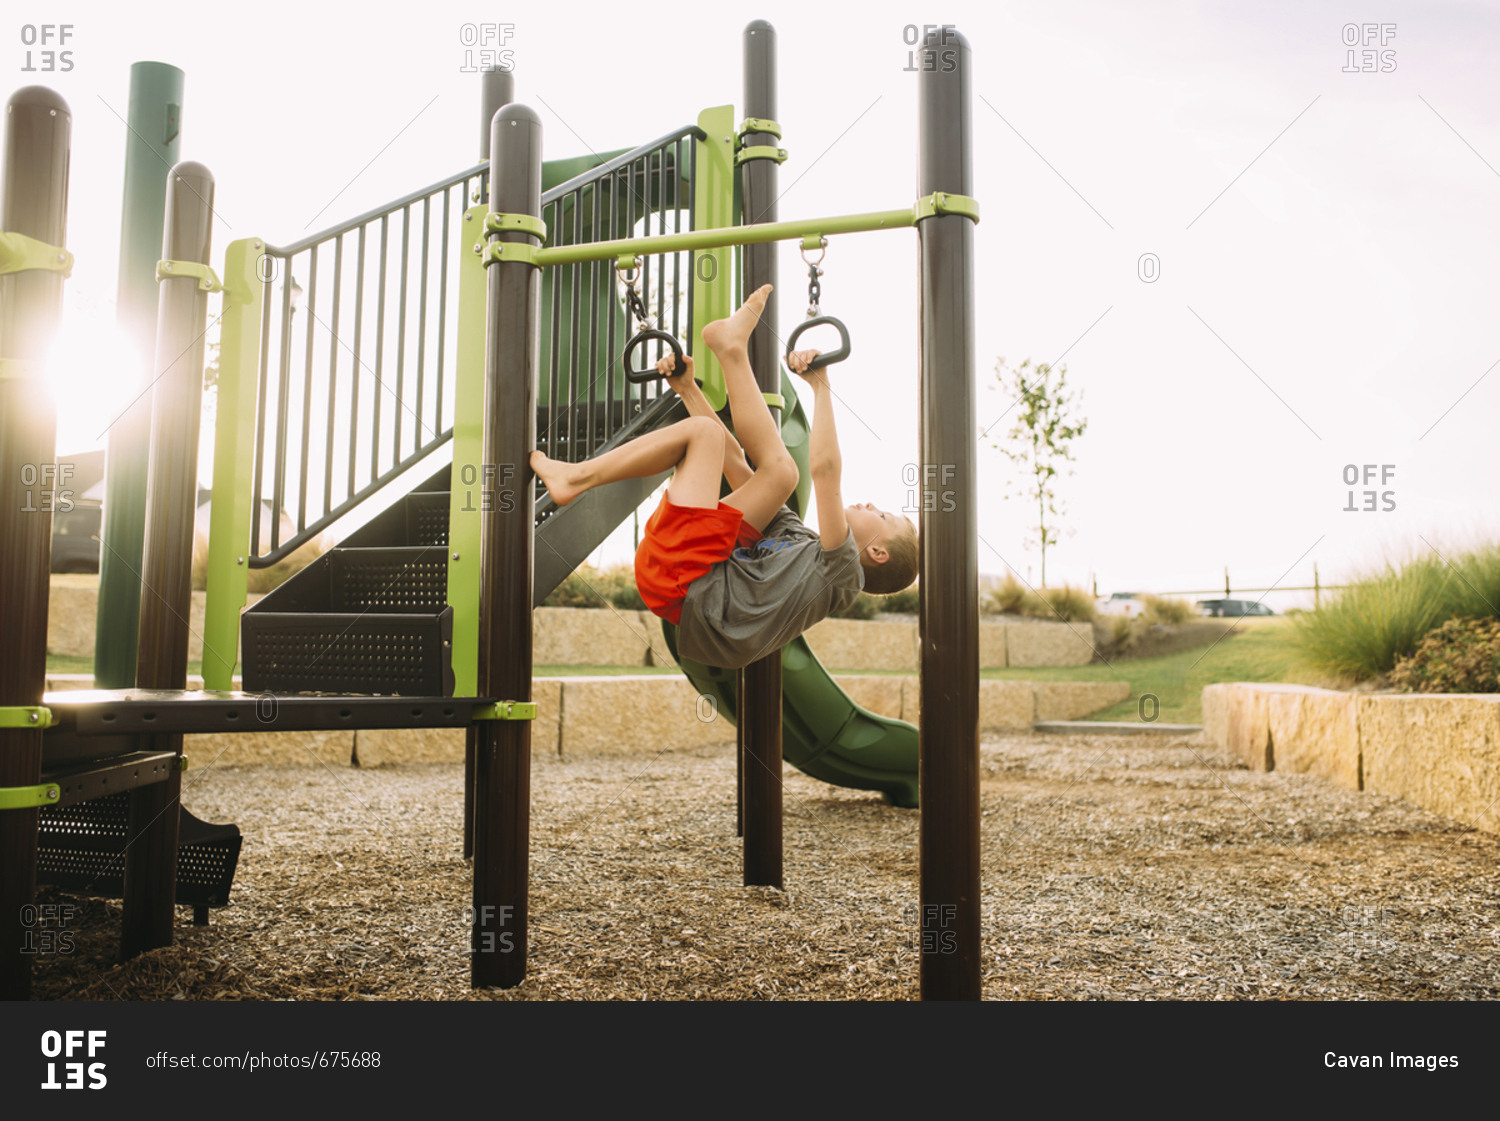 Playful boy hanging on outdoor play equipment while playing at playground